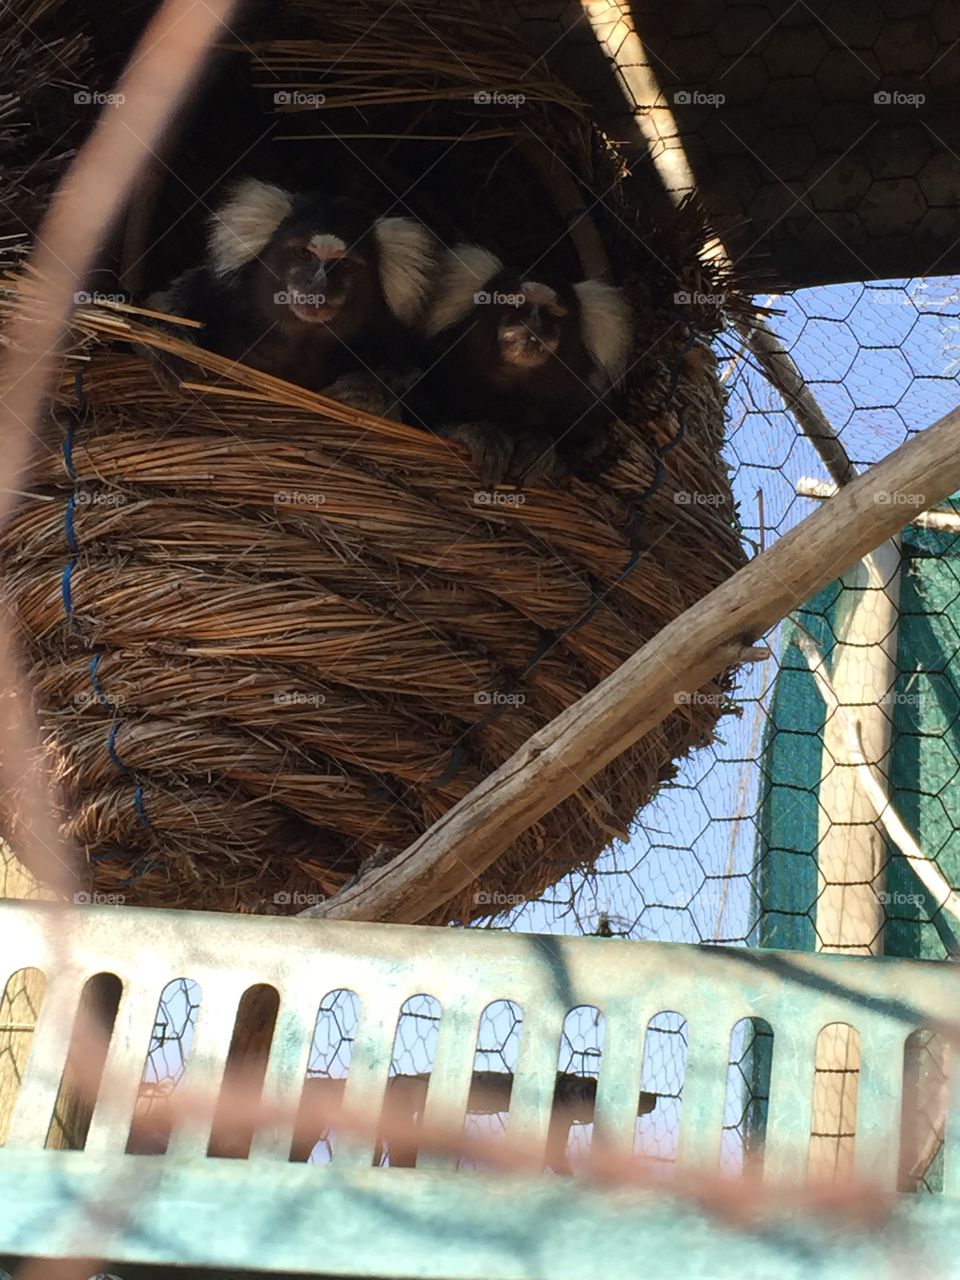 Marmosets in a basket